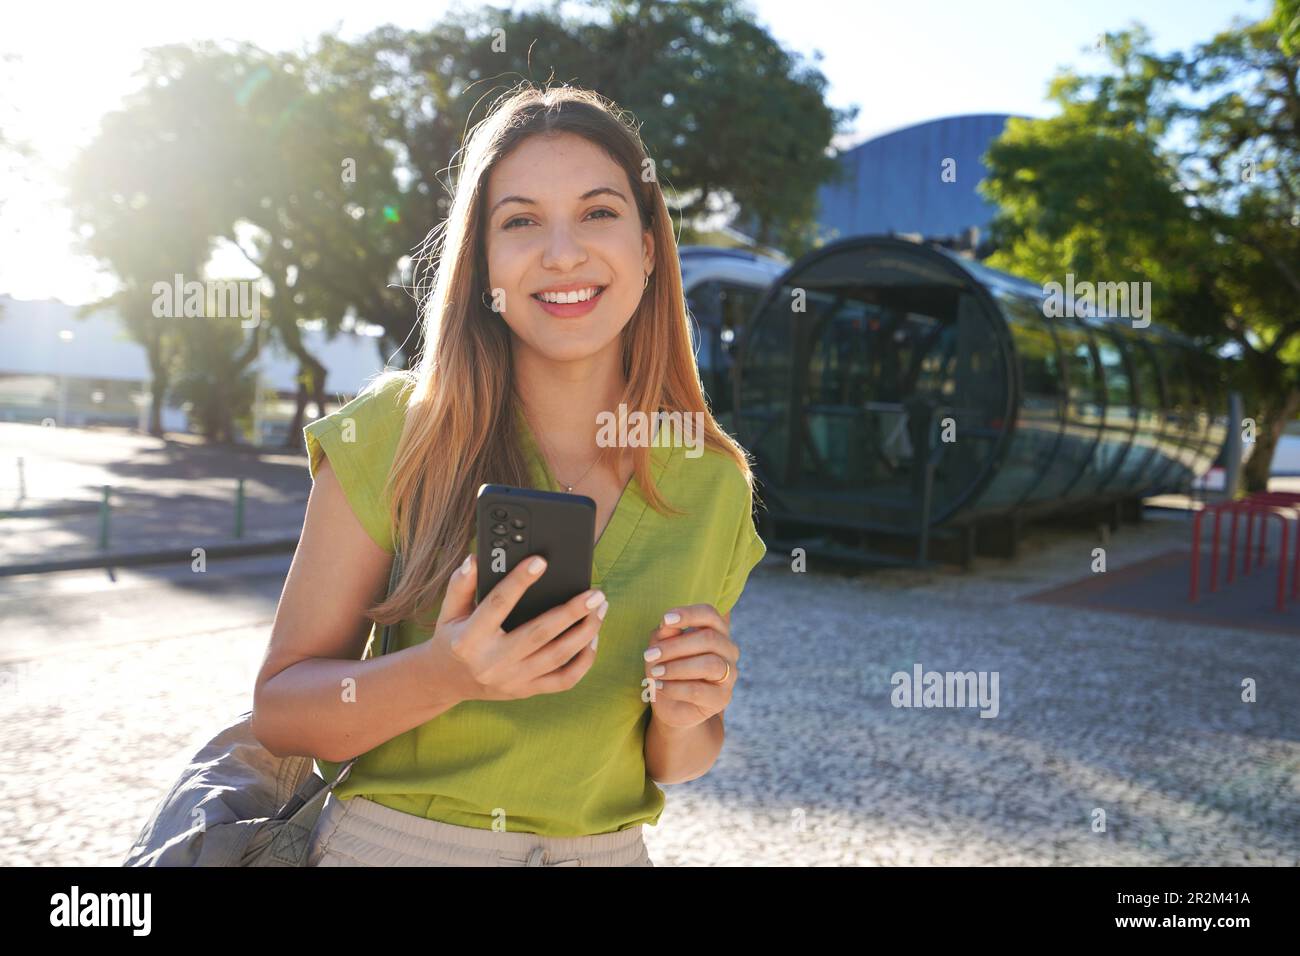 Portrait of happy smiling young woman looking at camera holding phone in Curitiba, Brazil Stock Photo